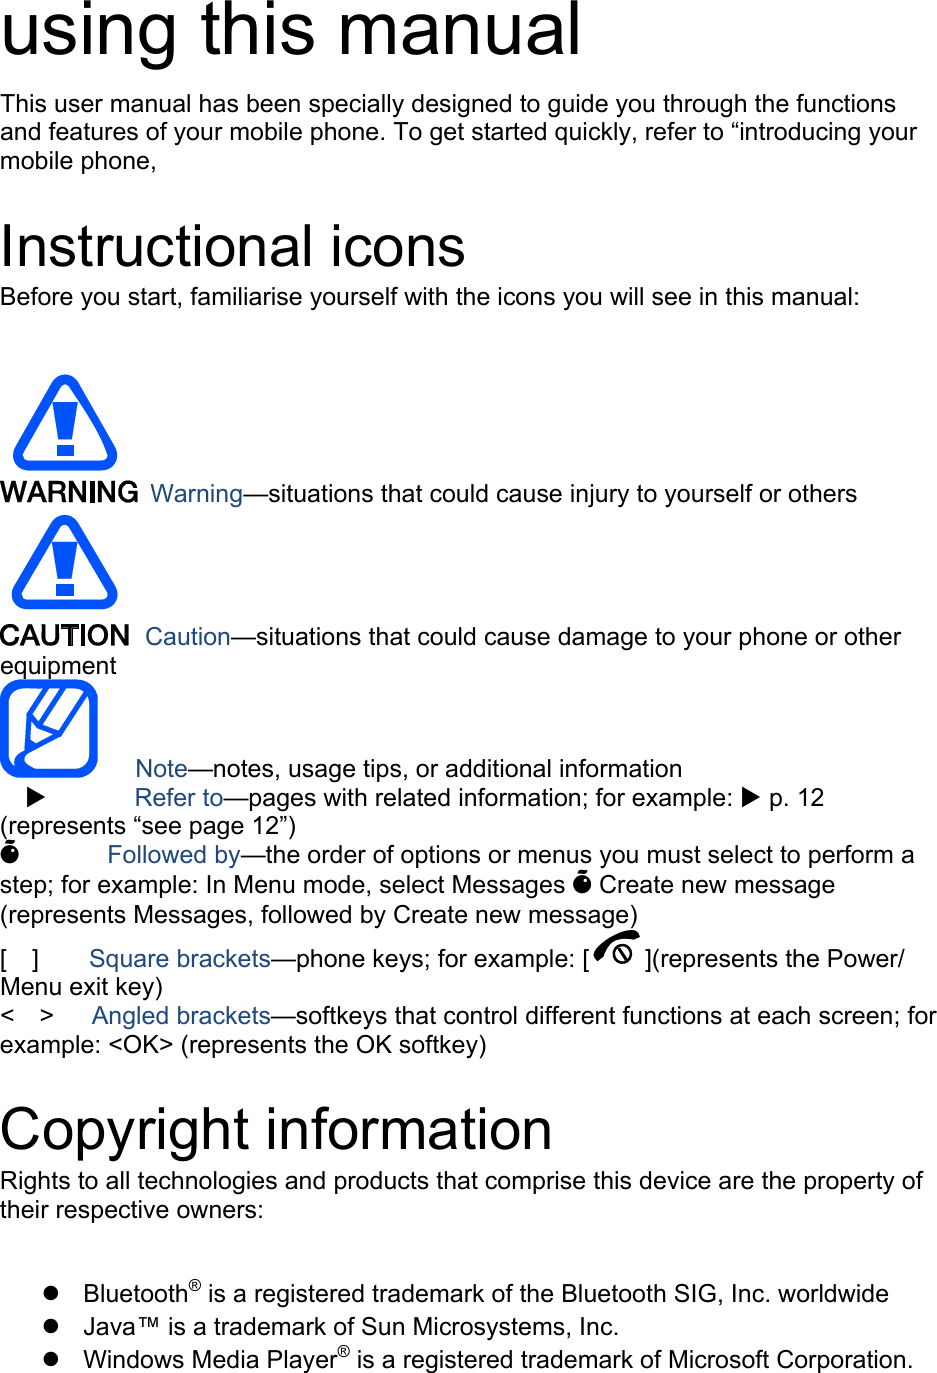 using this manual This user manual has been specially designed to guide you through the functions and features of your mobile phone. To get started quickly, refer to “introducing your mobile phone,  Instructional icons Before you start, familiarise yourself with the icons you will see in this manual:     Warning—situations that could cause injury to yourself or others  Caution—situations that could cause damage to your phone or other equipment    Note—notes, usage tips, or additional information   X       Refer to—pages with related information; for example: X p. 12 (represents “see page 12”) Õ       Followed by—the order of options or menus you must select to perform a step; for example: In Menu mode, select Messages Õ Create new message (represents Messages, followed by Create new message) [  ]    Square brackets—phone keys; for example: [ ](represents the Power/ Menu exit key) &lt;  &gt;   Angled brackets—softkeys that control different functions at each screen; for example: &lt;OK&gt; (represents the OK softkey)  Copyright information Rights to all technologies and products that comprise this device are the property of their respective owners:  z Bluetooth® is a registered trademark of the Bluetooth SIG, Inc. worldwide z  Java™ is a trademark of Sun Microsystems, Inc. z Windows Media Player® is a registered trademark of Microsoft Corporation. 